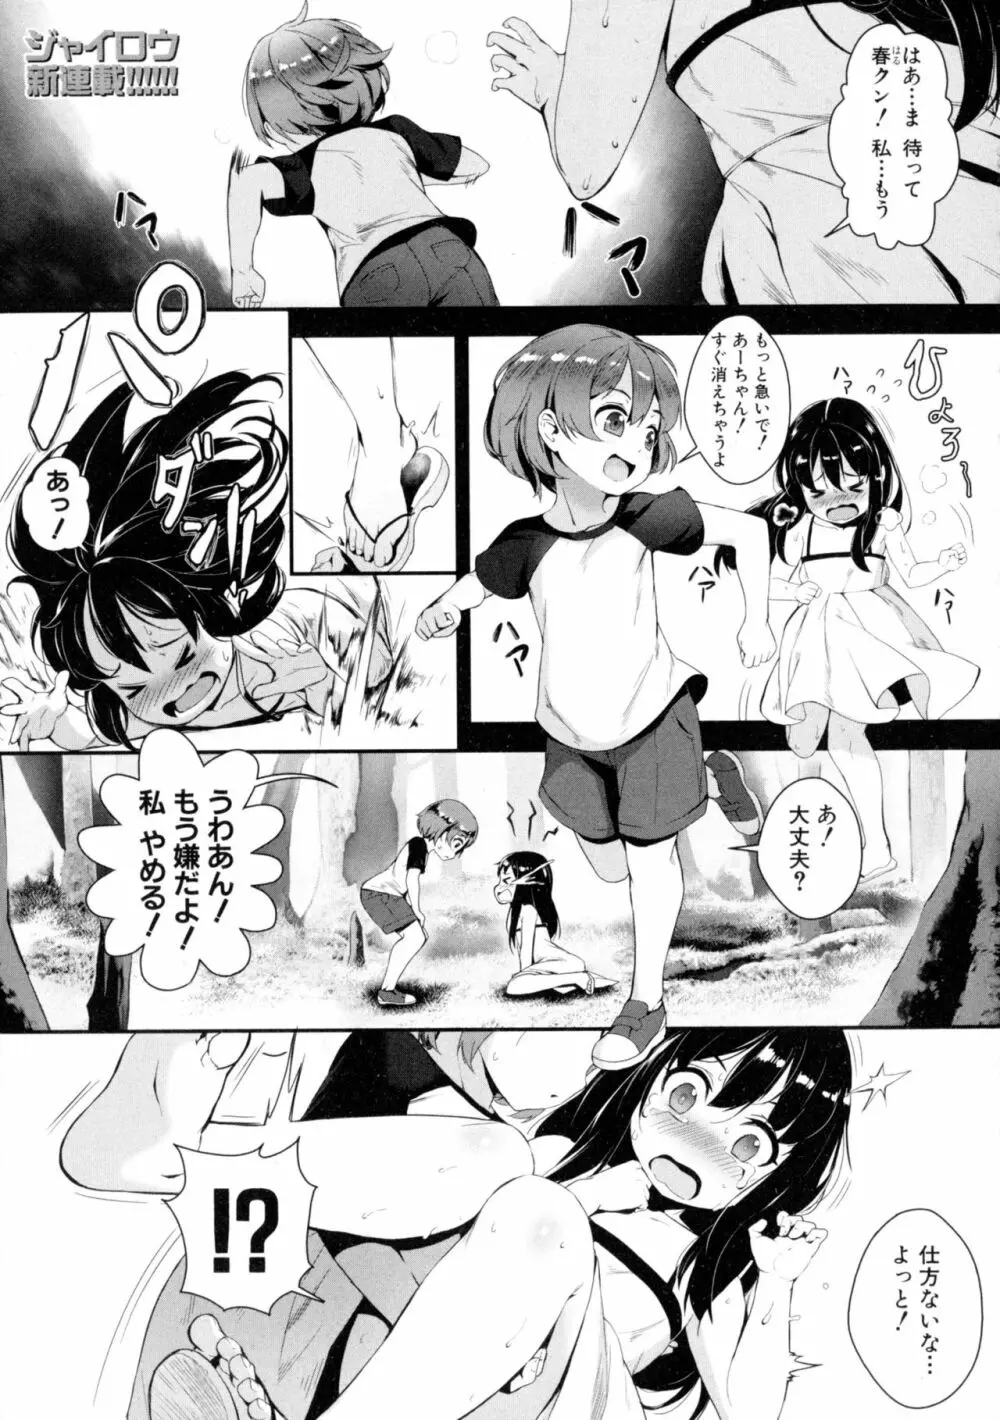 T.F.S 第1-4話 + 御負け PV Page.1